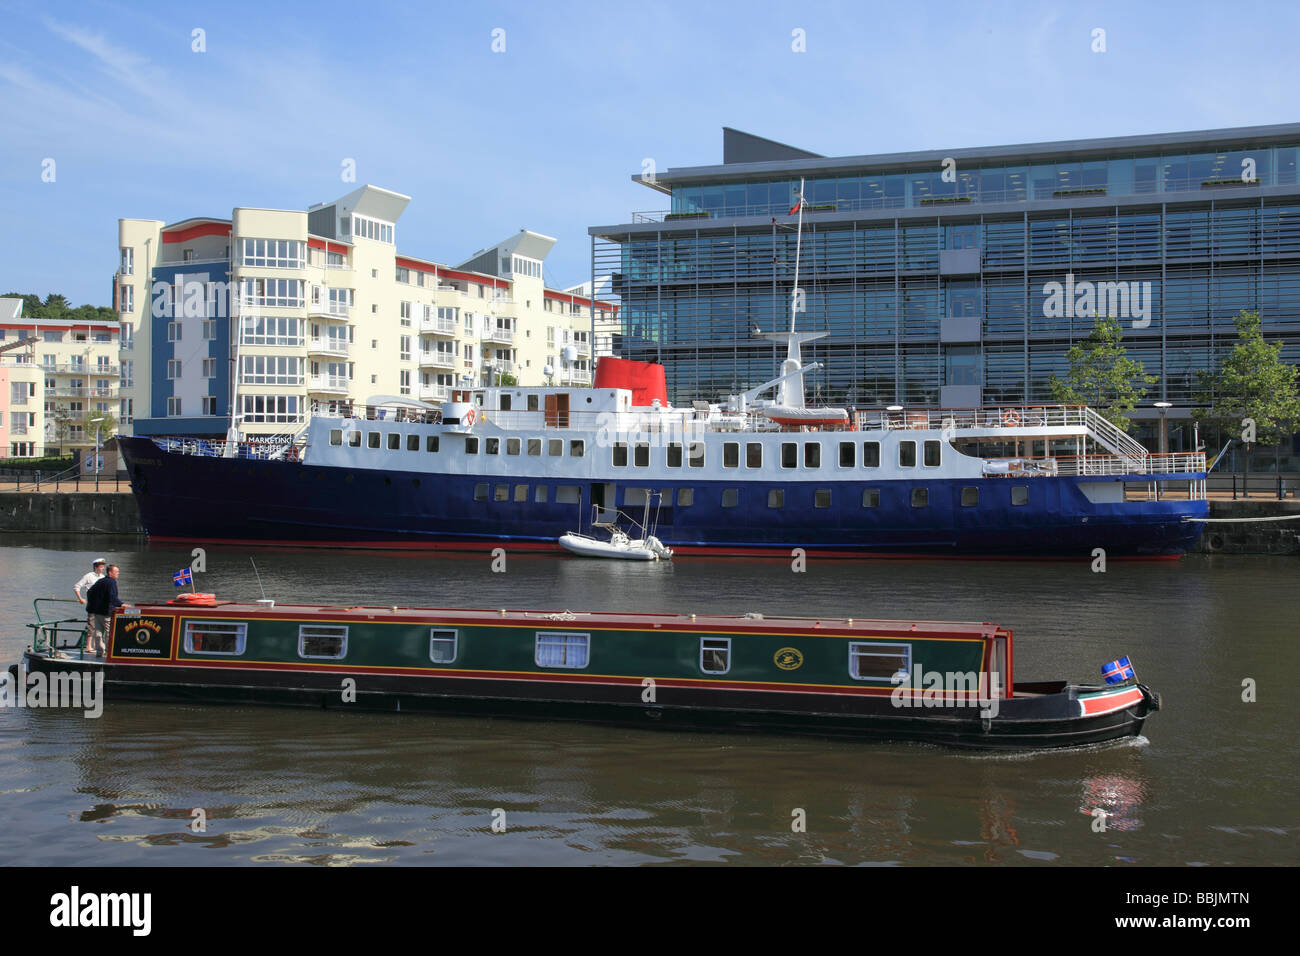 A barge in Bristol Floating Harbour, City of Bristol, England, UK Stock Photo